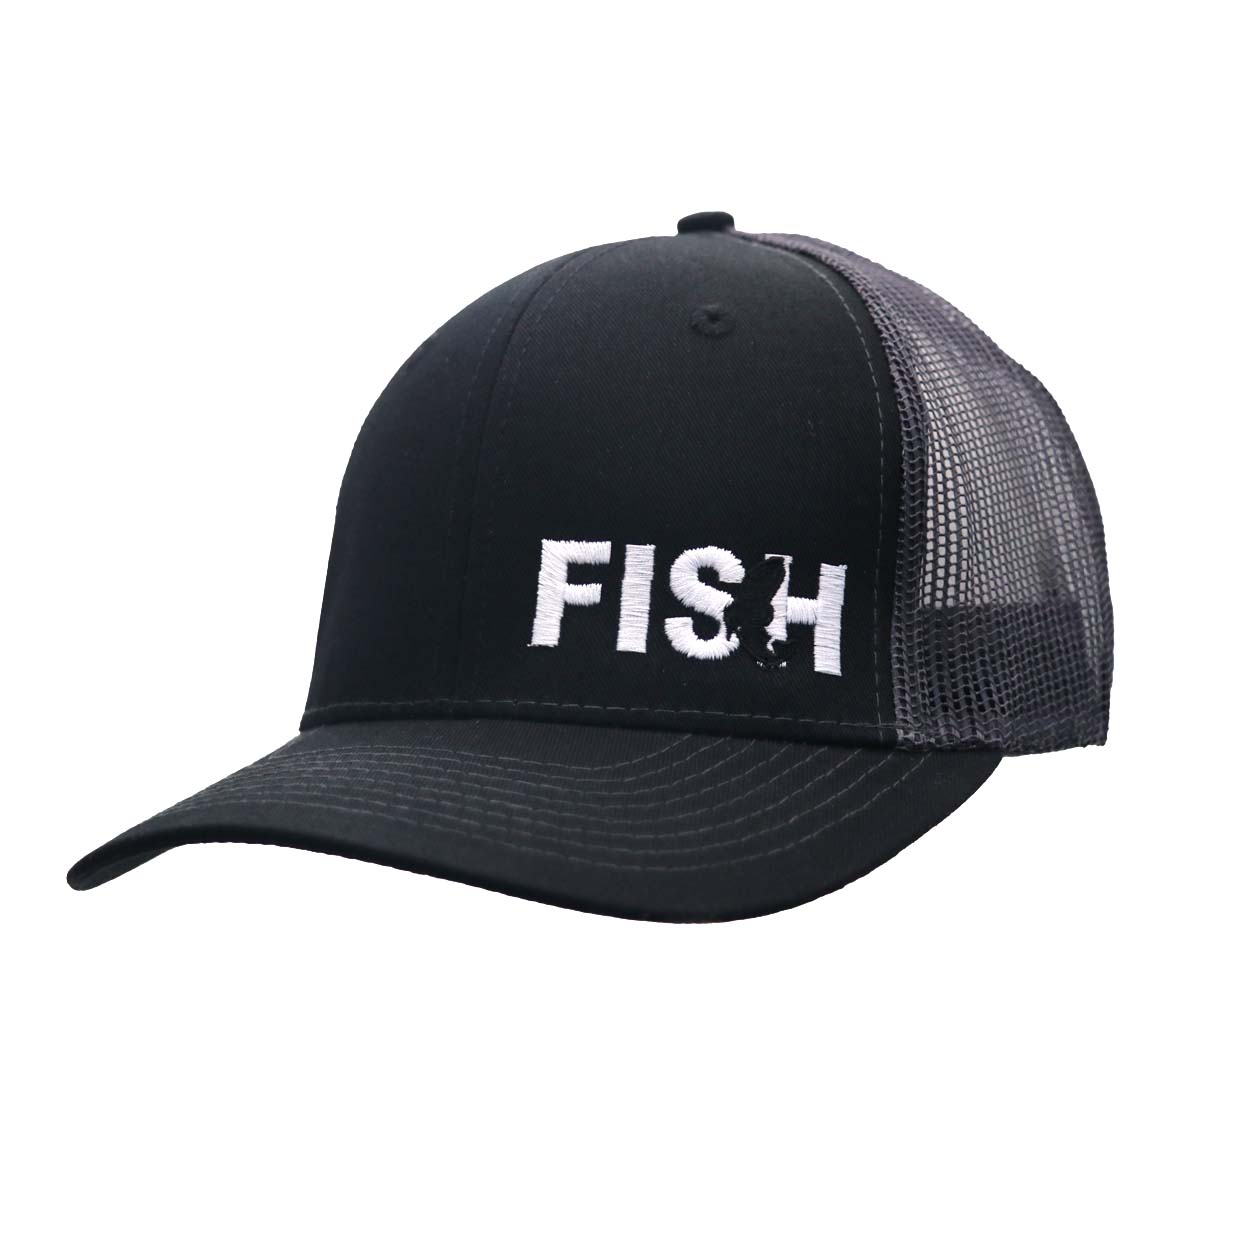 Fish Catch Logo Classic Pro Night Out Embroidered Snapback Trucker Hat Black/Gray